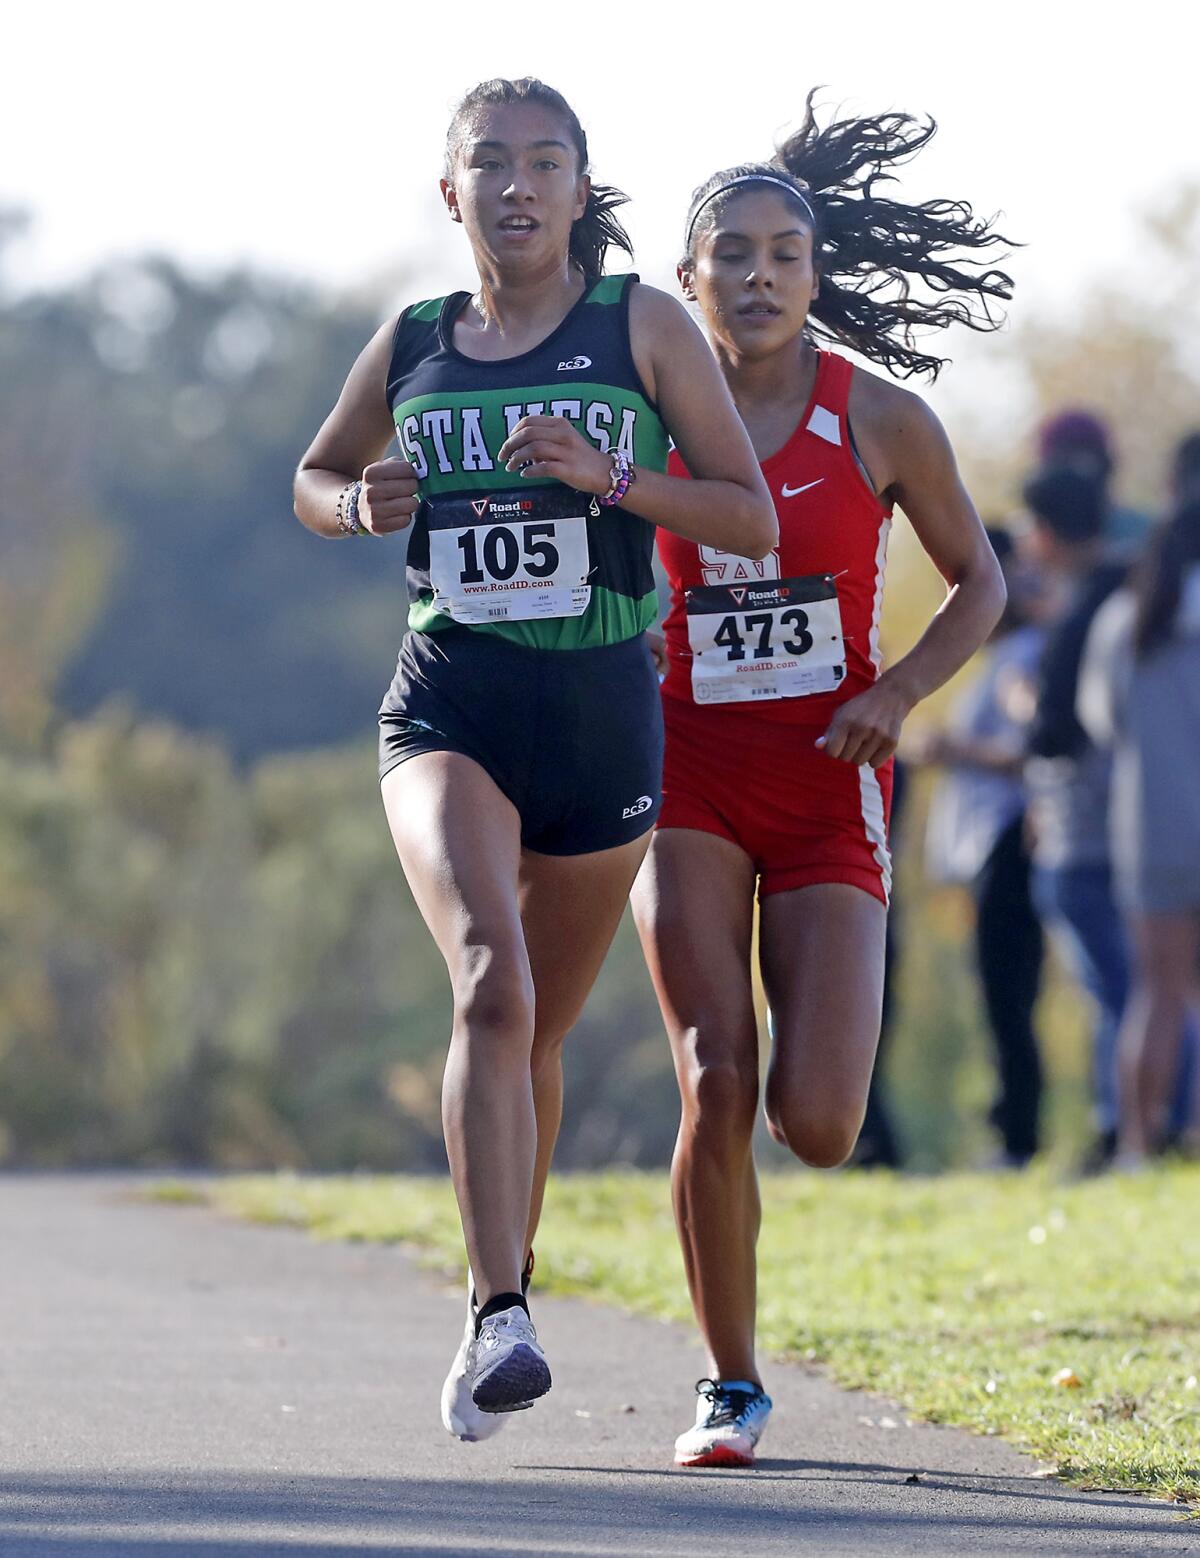 Costa Mesa's Diane Molina, left, and Santa Ana's Maria Hernandez compete during the first lap of the Orange Coast League girls' finals at Irvine Regional Park in Orange on Tuesday.